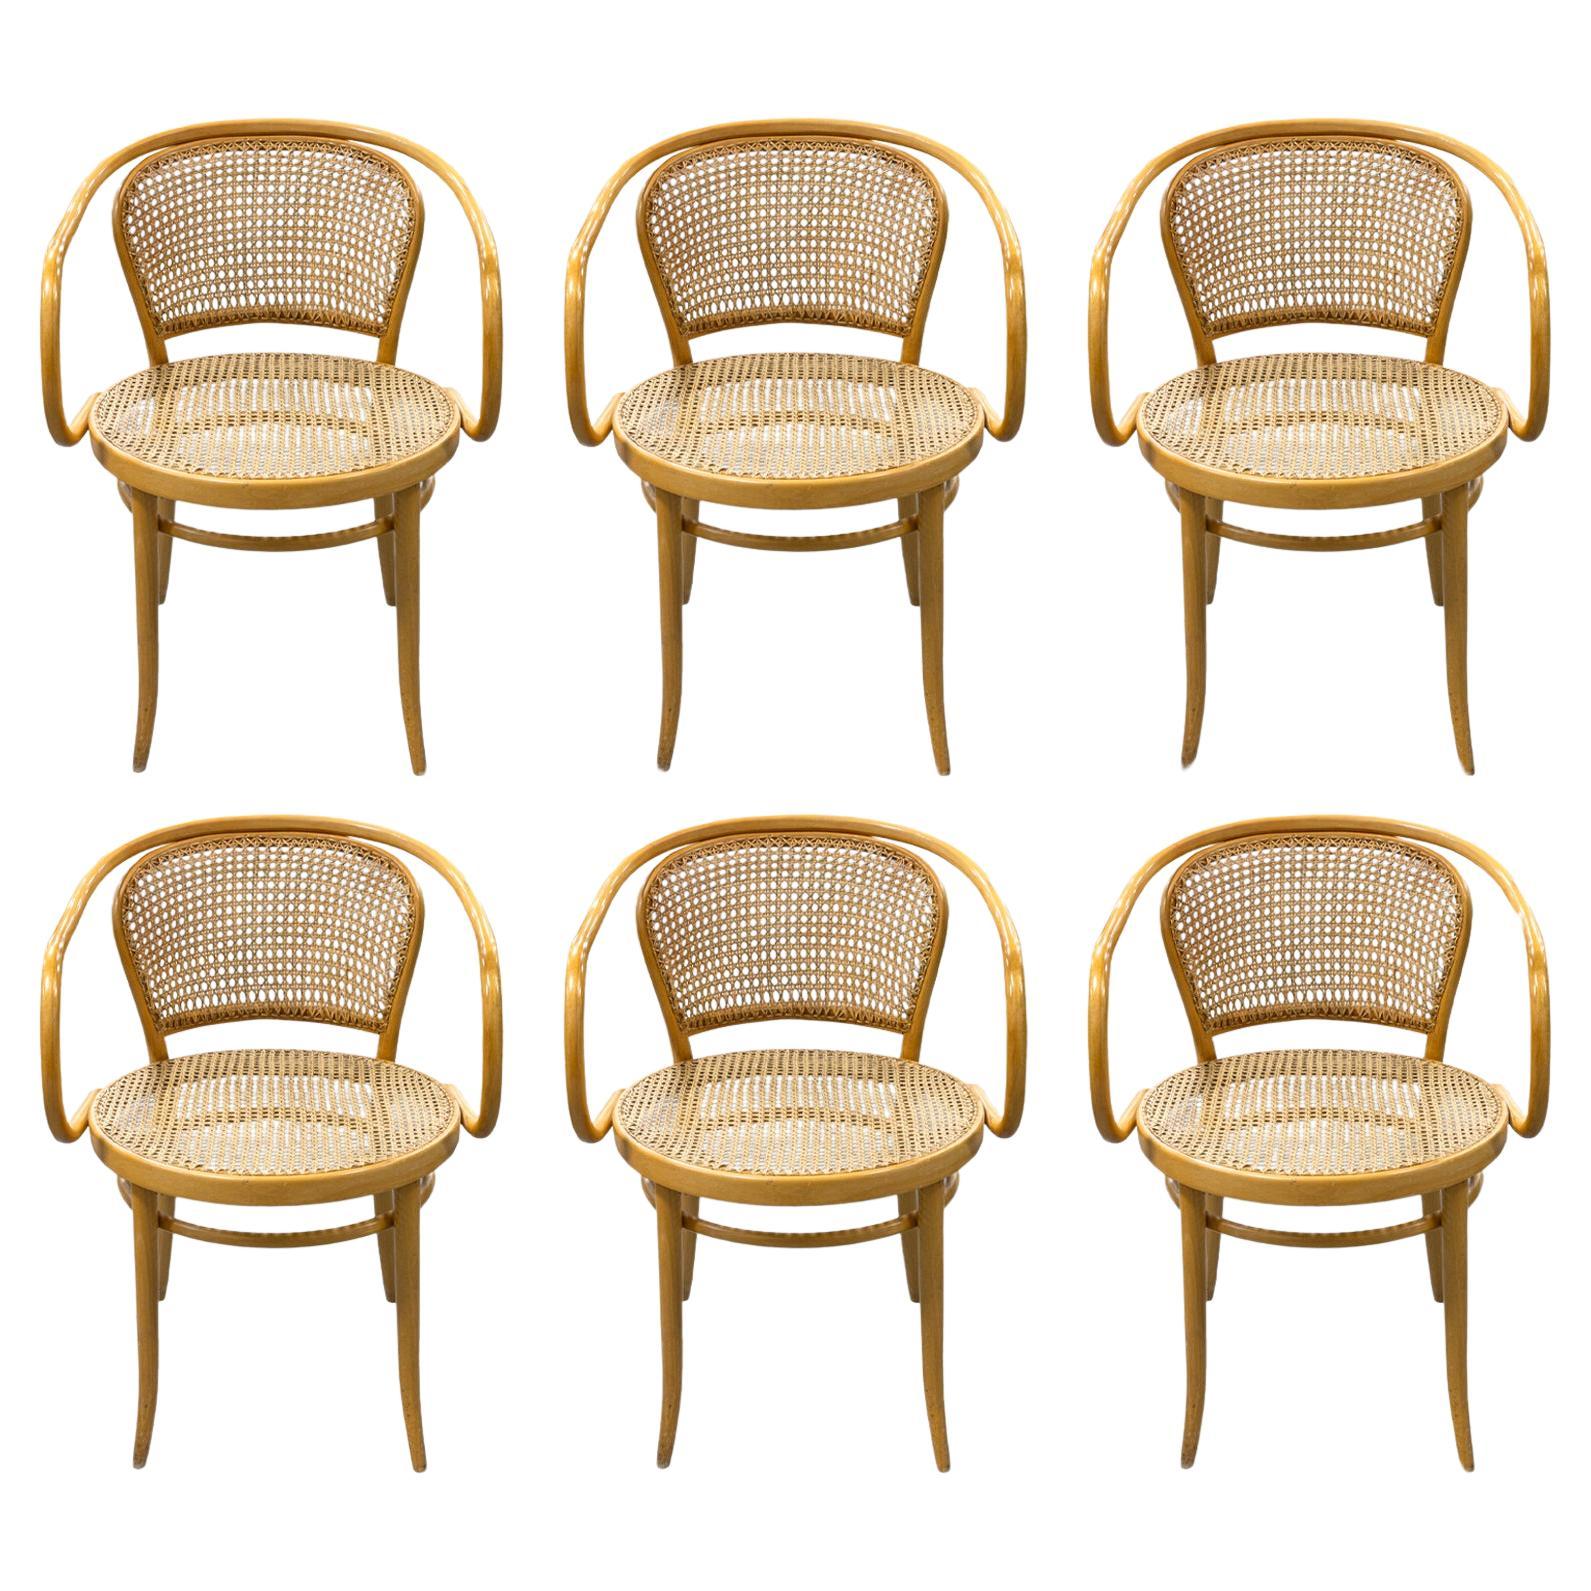 Set of 6 Stendig Beechwood and Rattan Mid Century Modern Armchair Dining Chairs For Sale